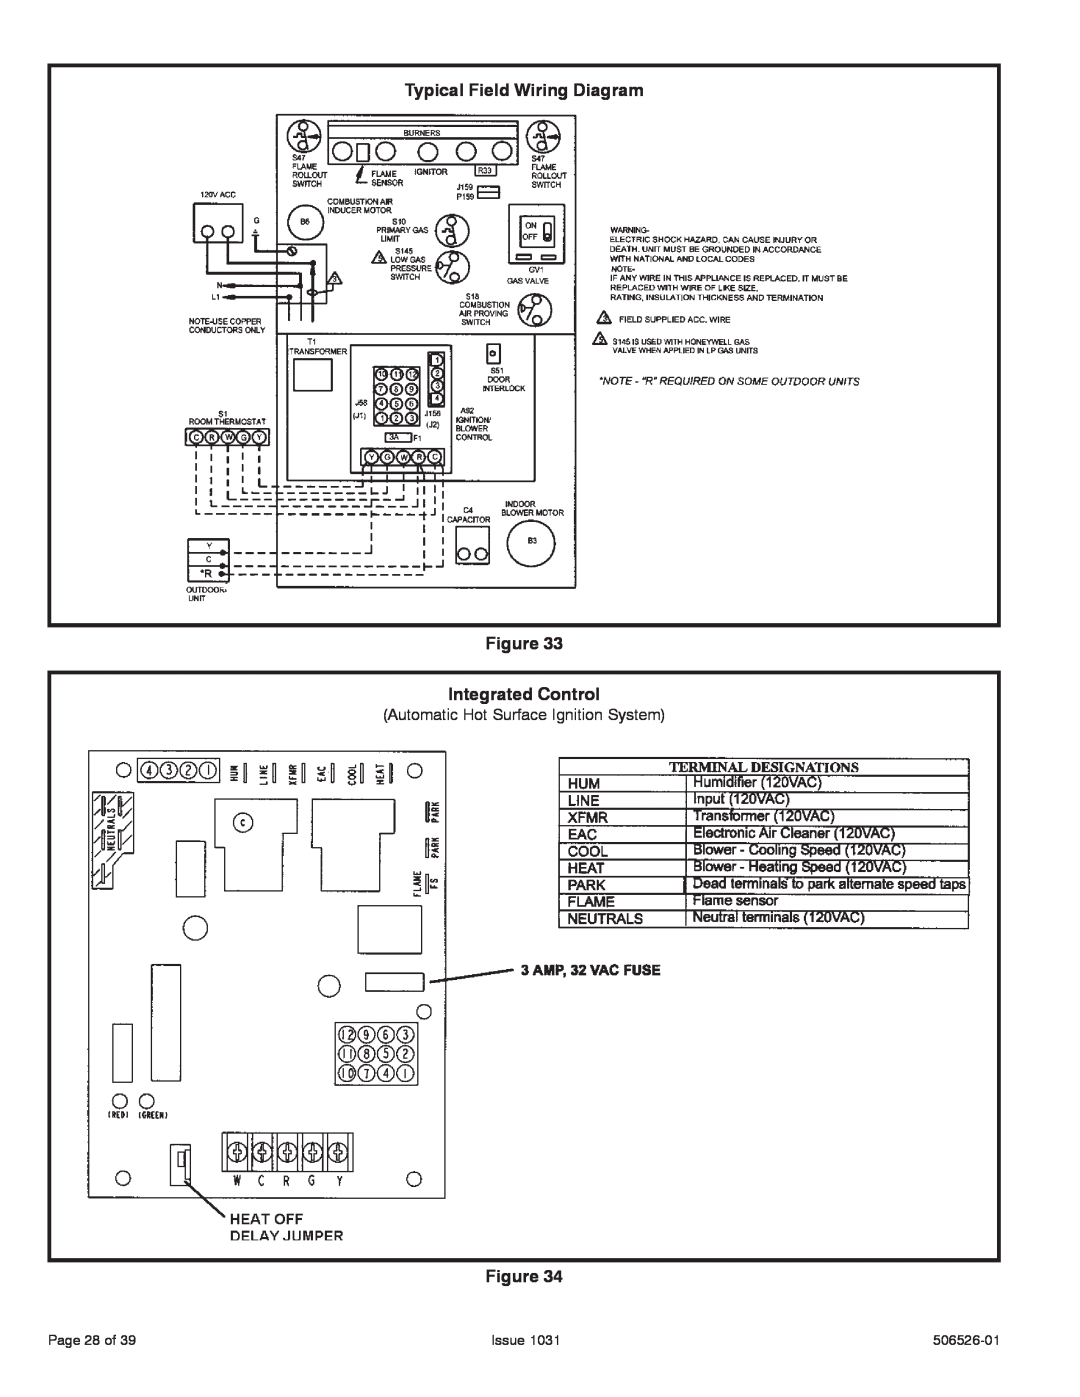 Allied Air Enterprises A80UH, 80G1UH installation instructions Typical Field Wiring Diagram Figure, Integrated Control 